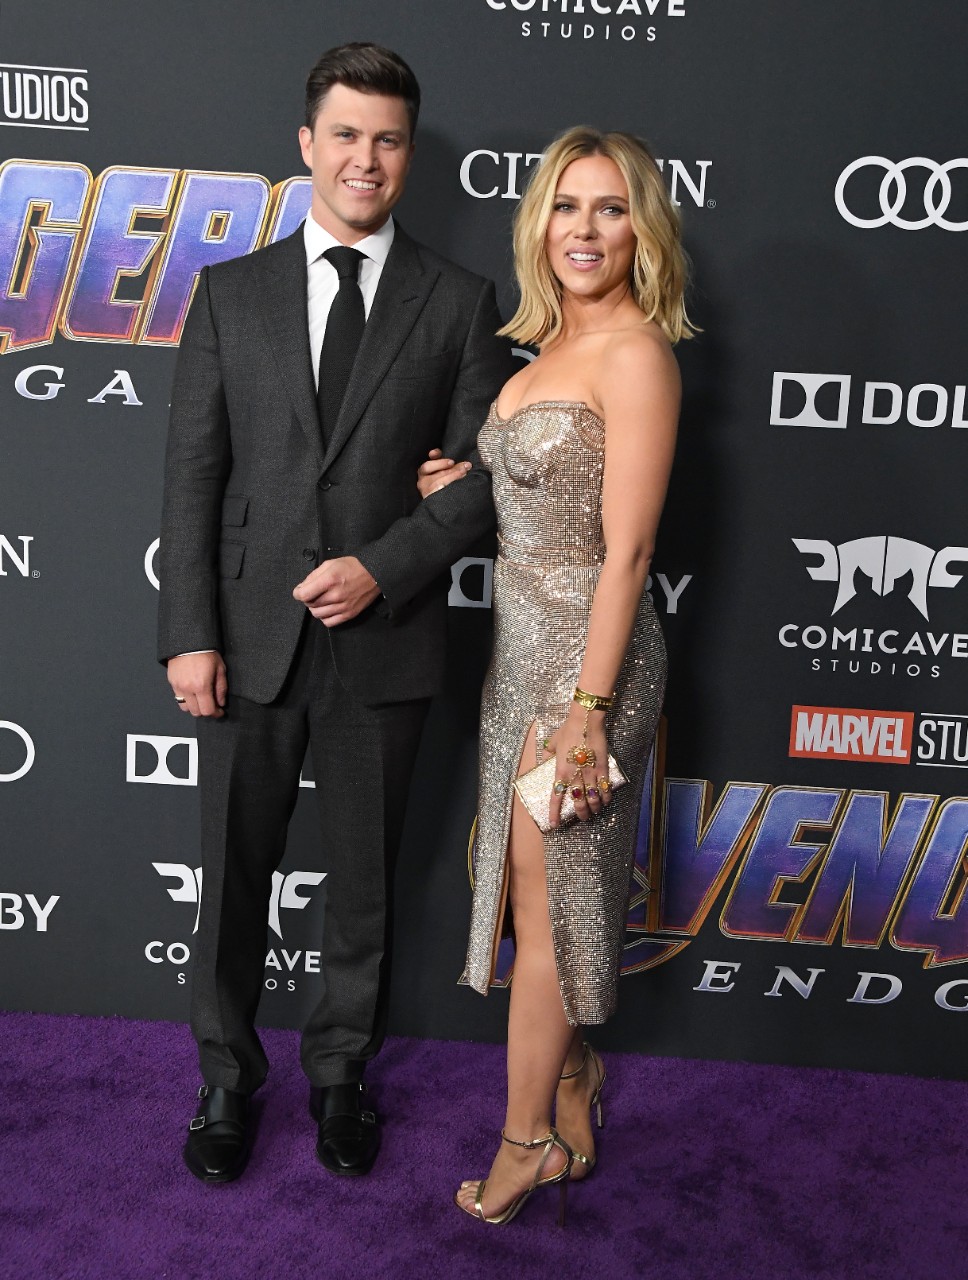 LOS ANGELES, CALIFORNIA - APRIL 22: Scarlett Johansson and Colin Jost arrives at the world premiere Of Walt Disney Studios Motion Pictures "Avengers: Endgame" at Los Angeles Convention Center on April 22, 2019 in Los Angeles, California. (Photo by Steve Granitz/WireImage)